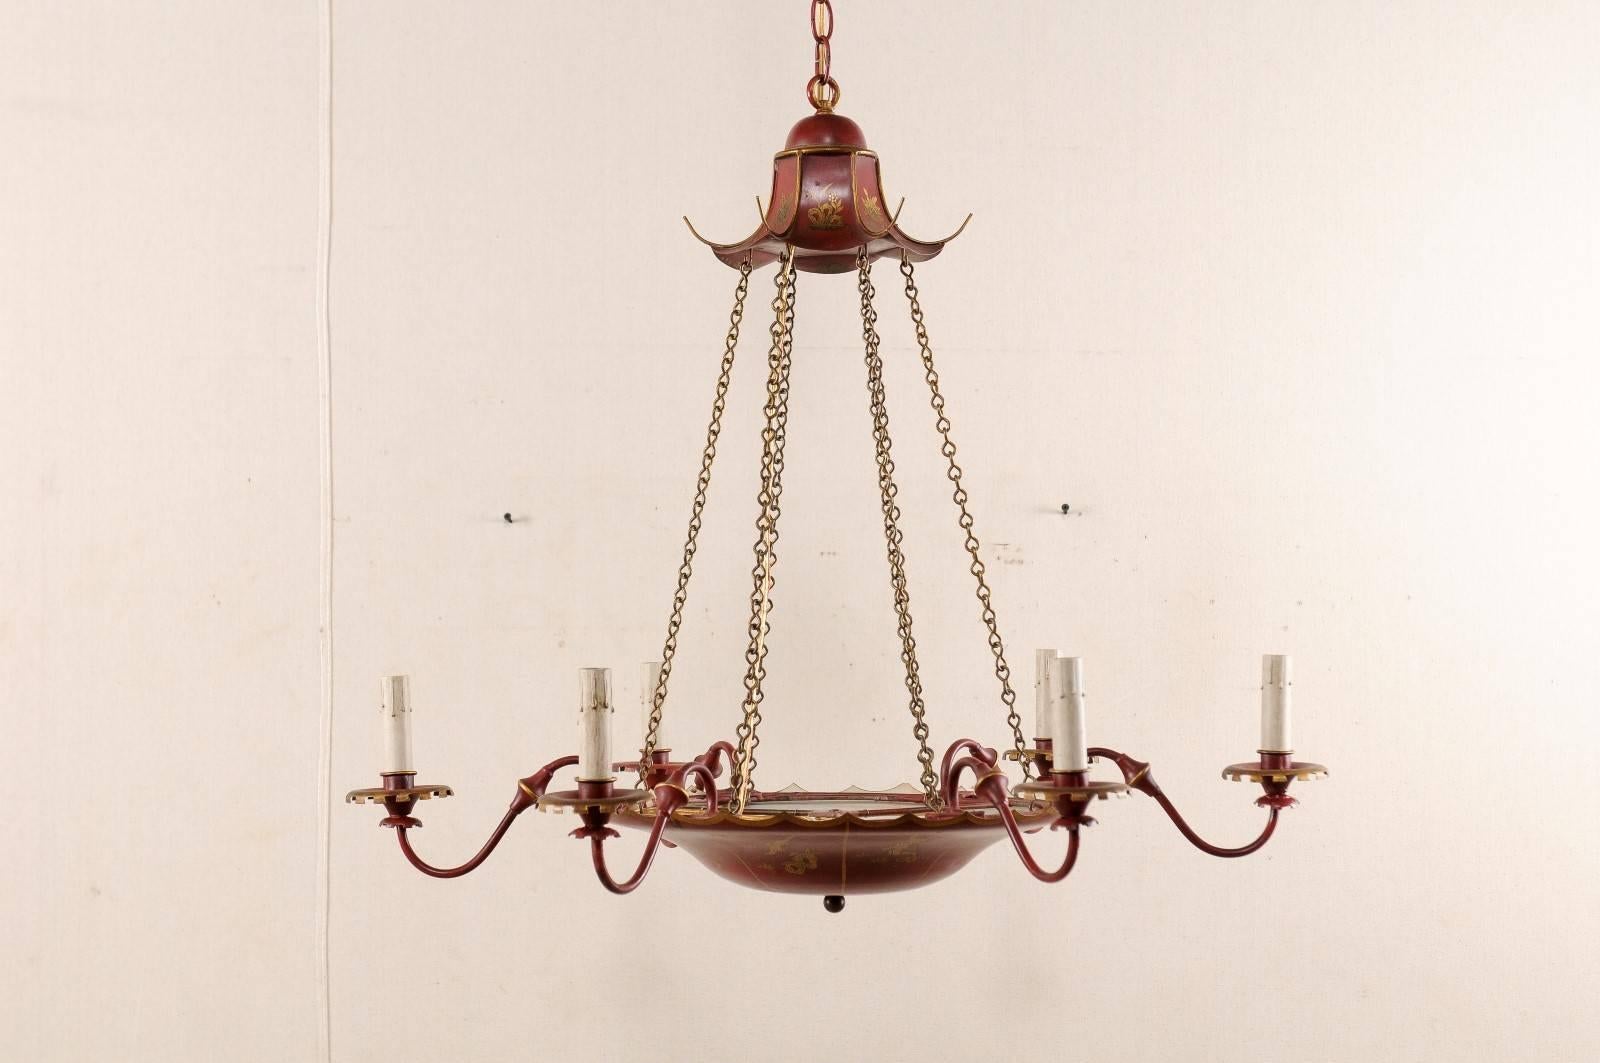 A vintage English red tole six-light chandelier. This English chandelier from the mid 20th century features a red tole finish with chinoiserie decor and painted gold figures. This English light fixture has a circular central red tole basket which is